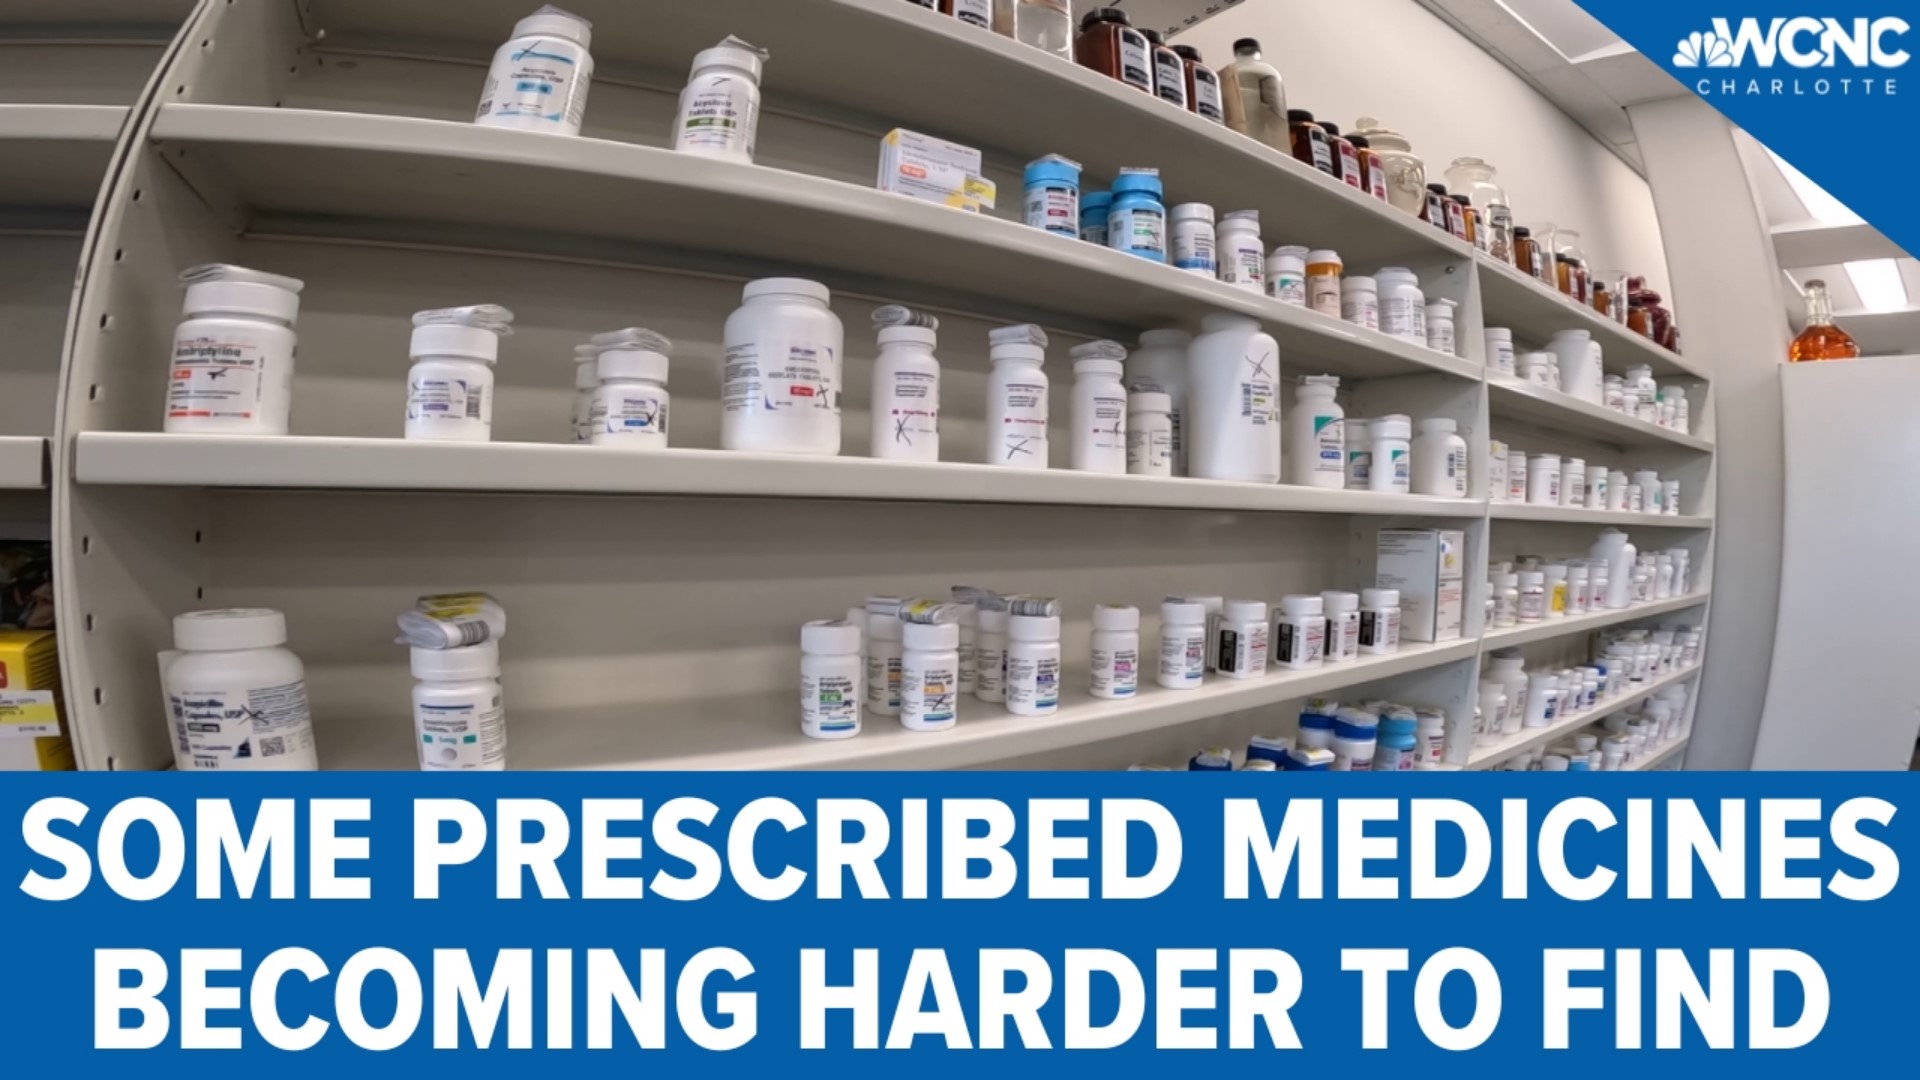 Families have been dealing with sparse shelves in pharmacies for a while.